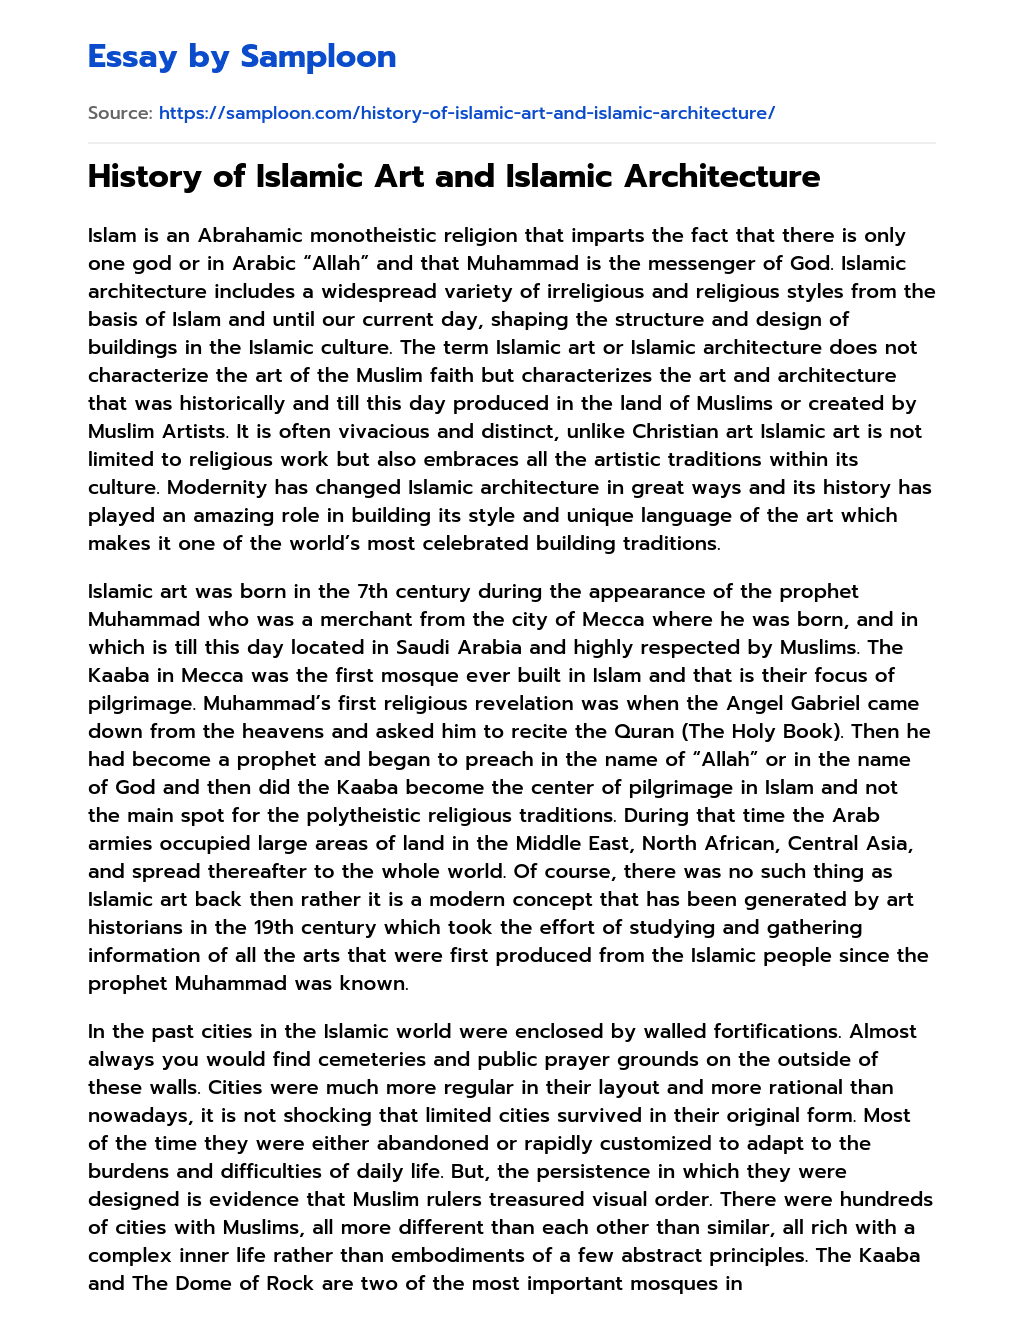 History of Islamic Art and Islamic Architecture essay